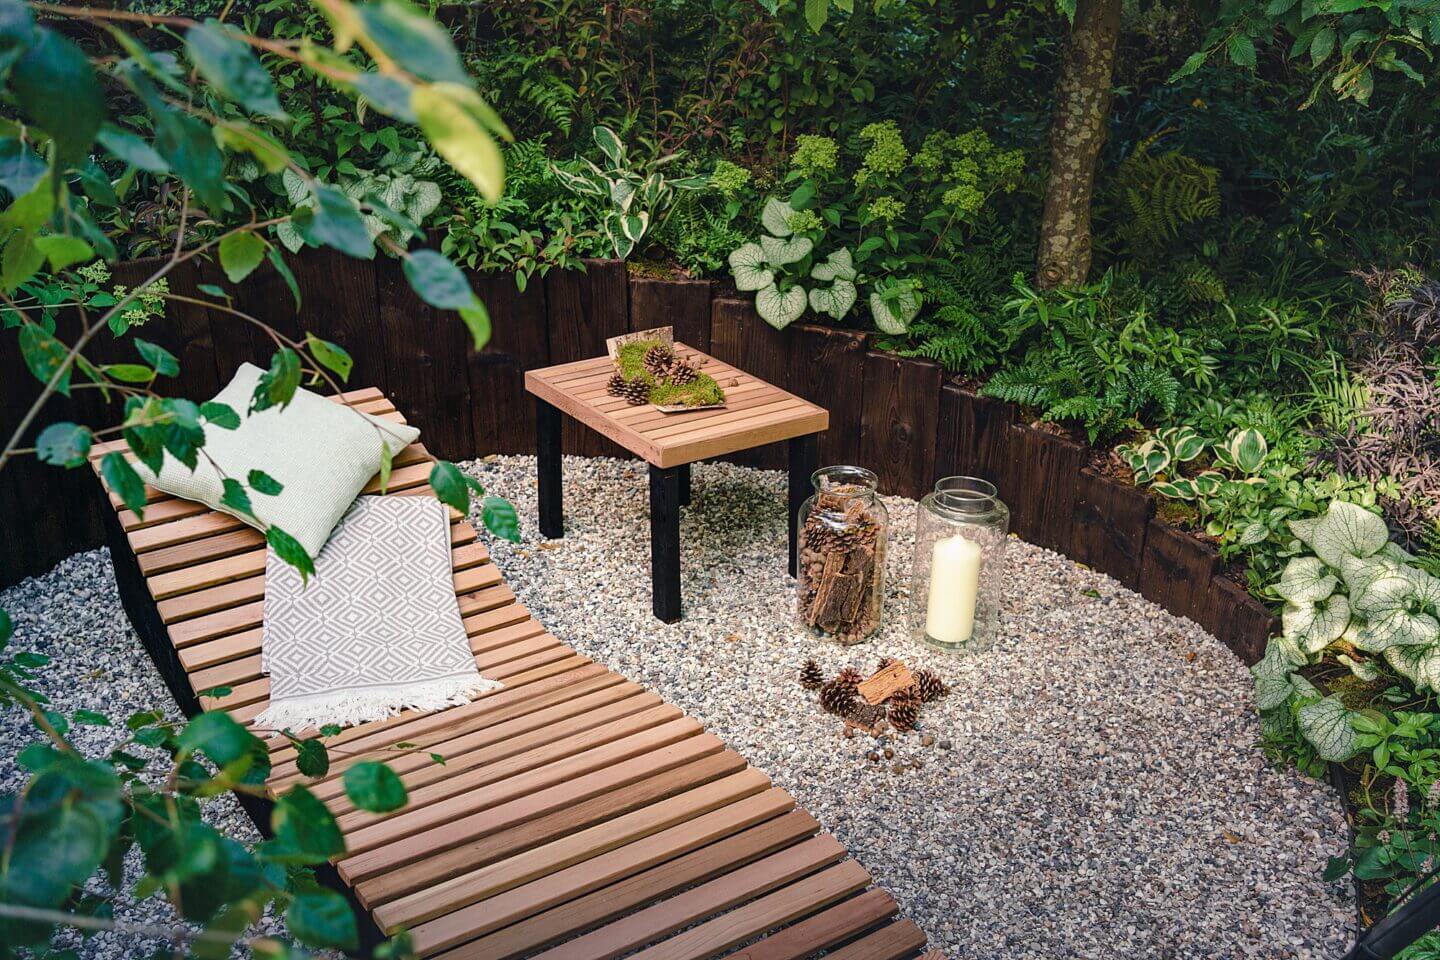 Wooden lounger chair amongst green plants and candles